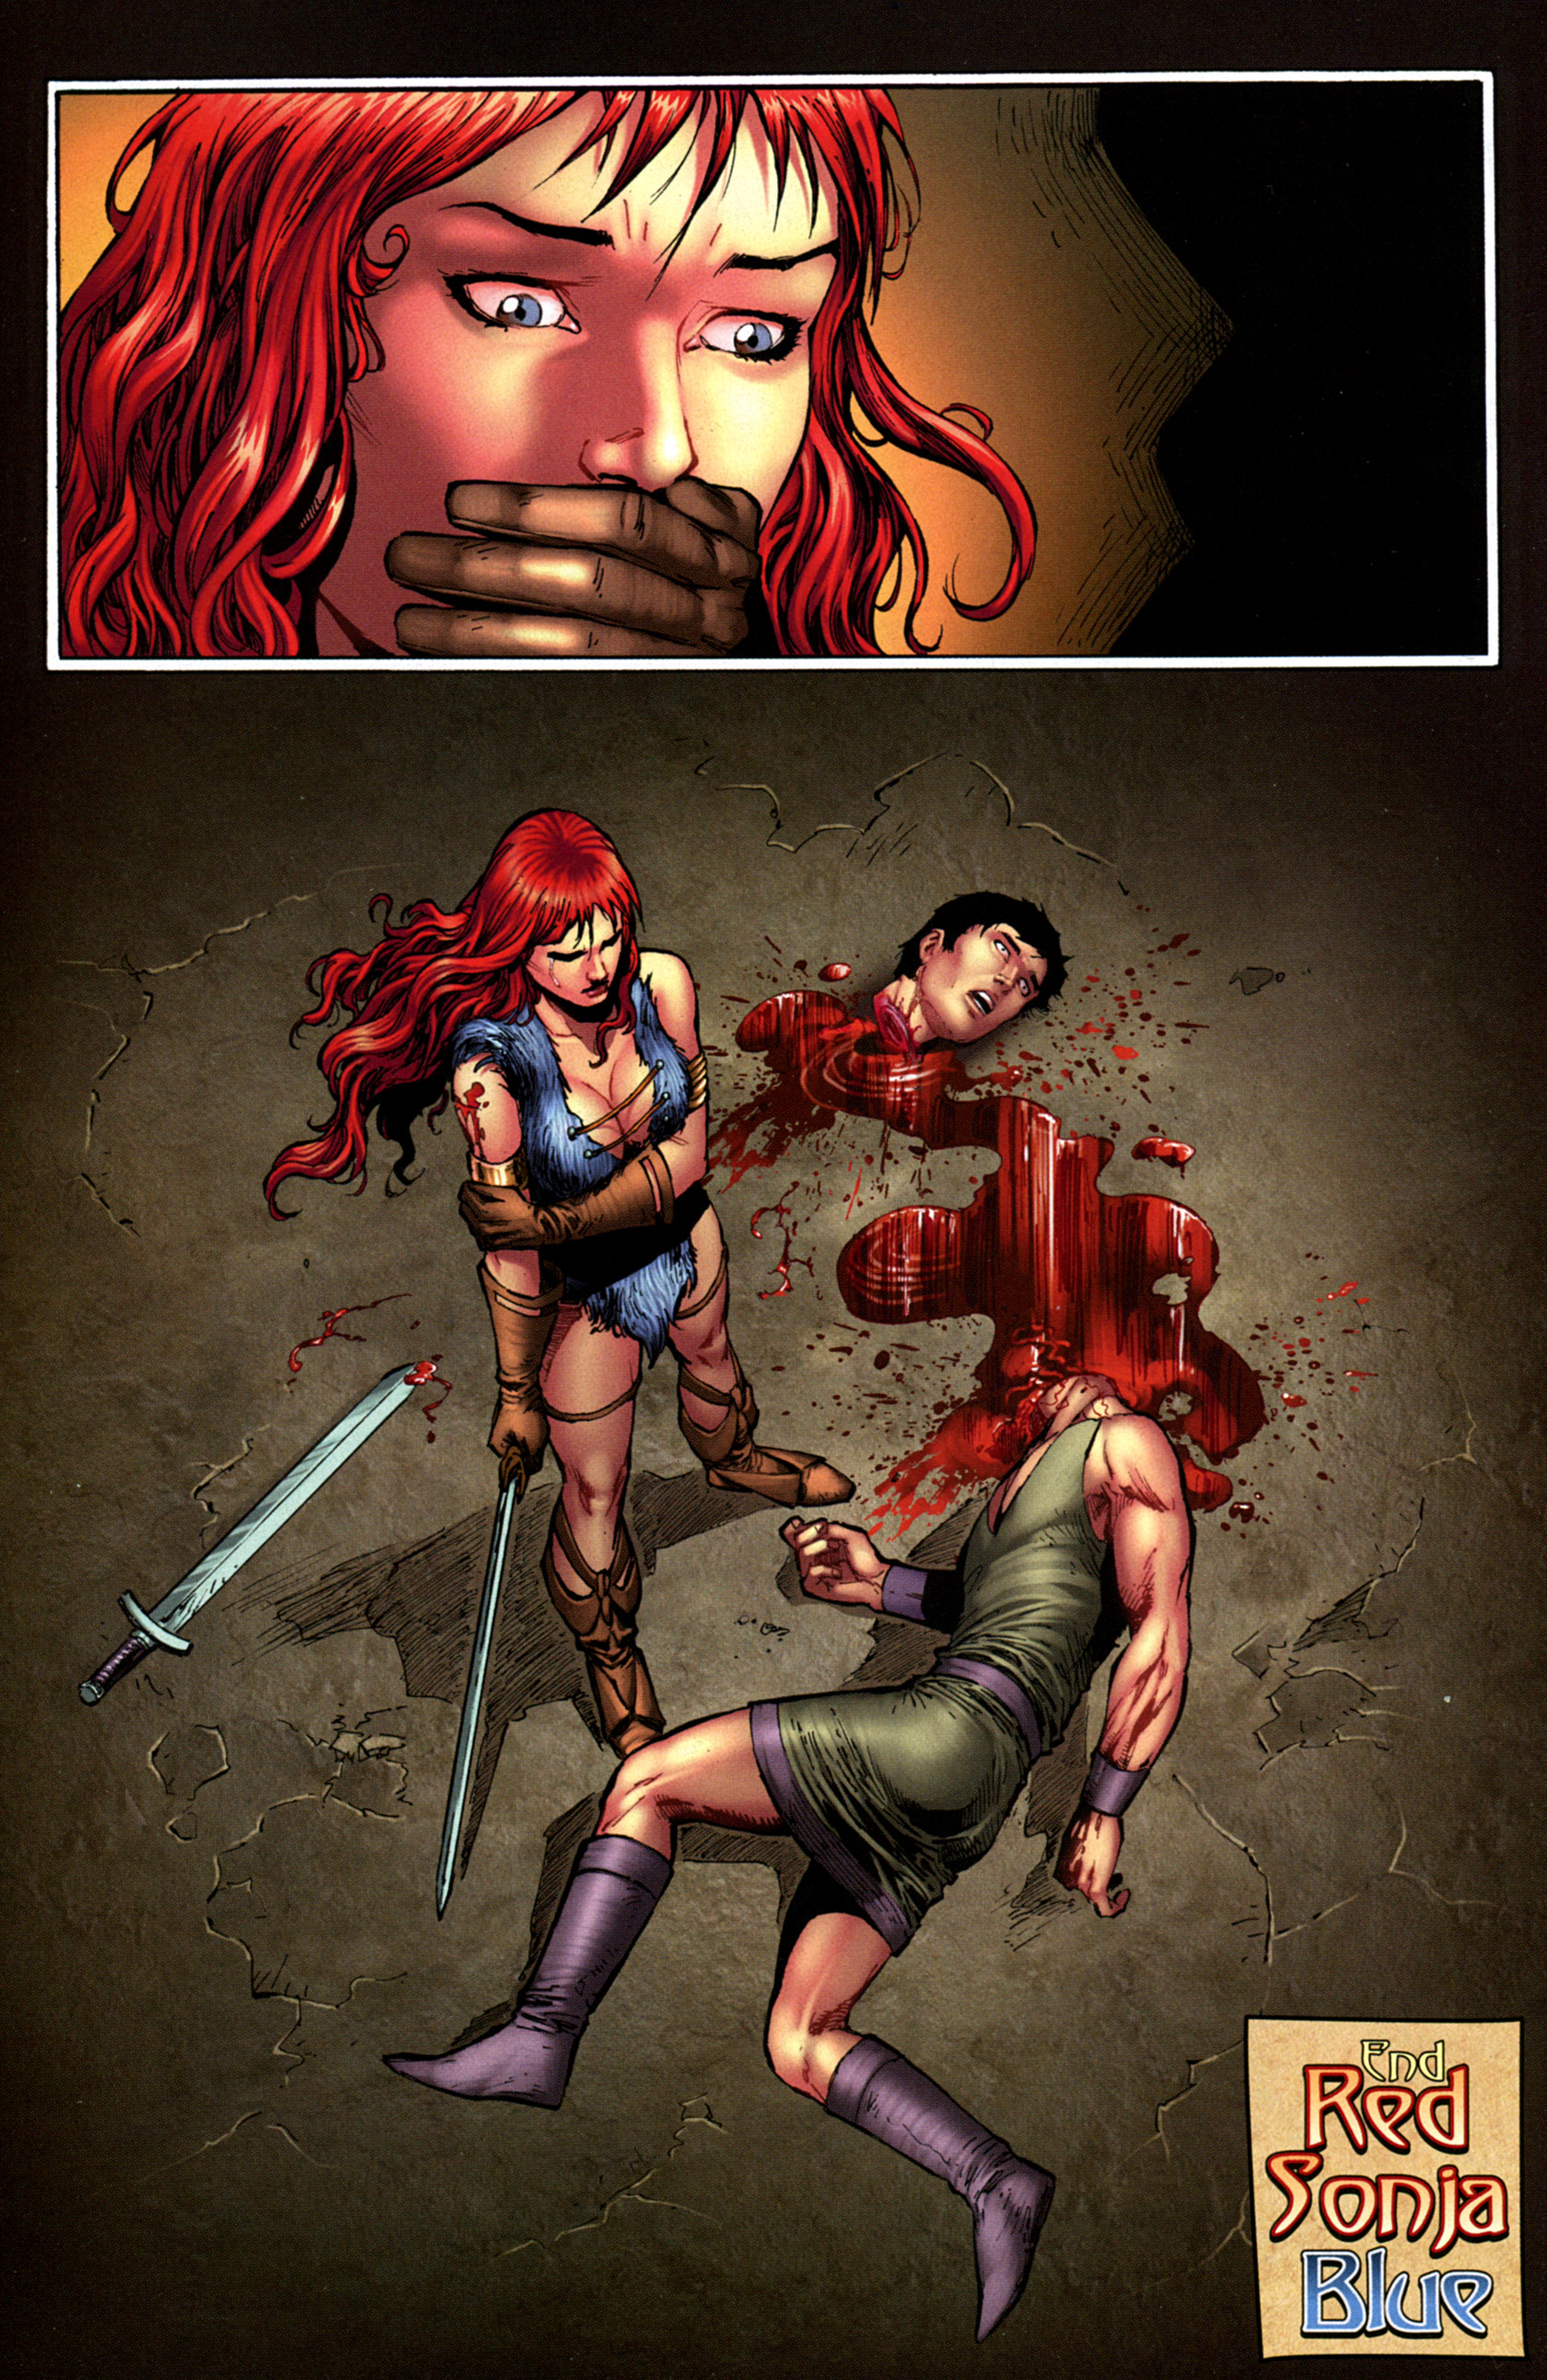 Read online Red Sonja: Blue comic -  Issue # Full - 41